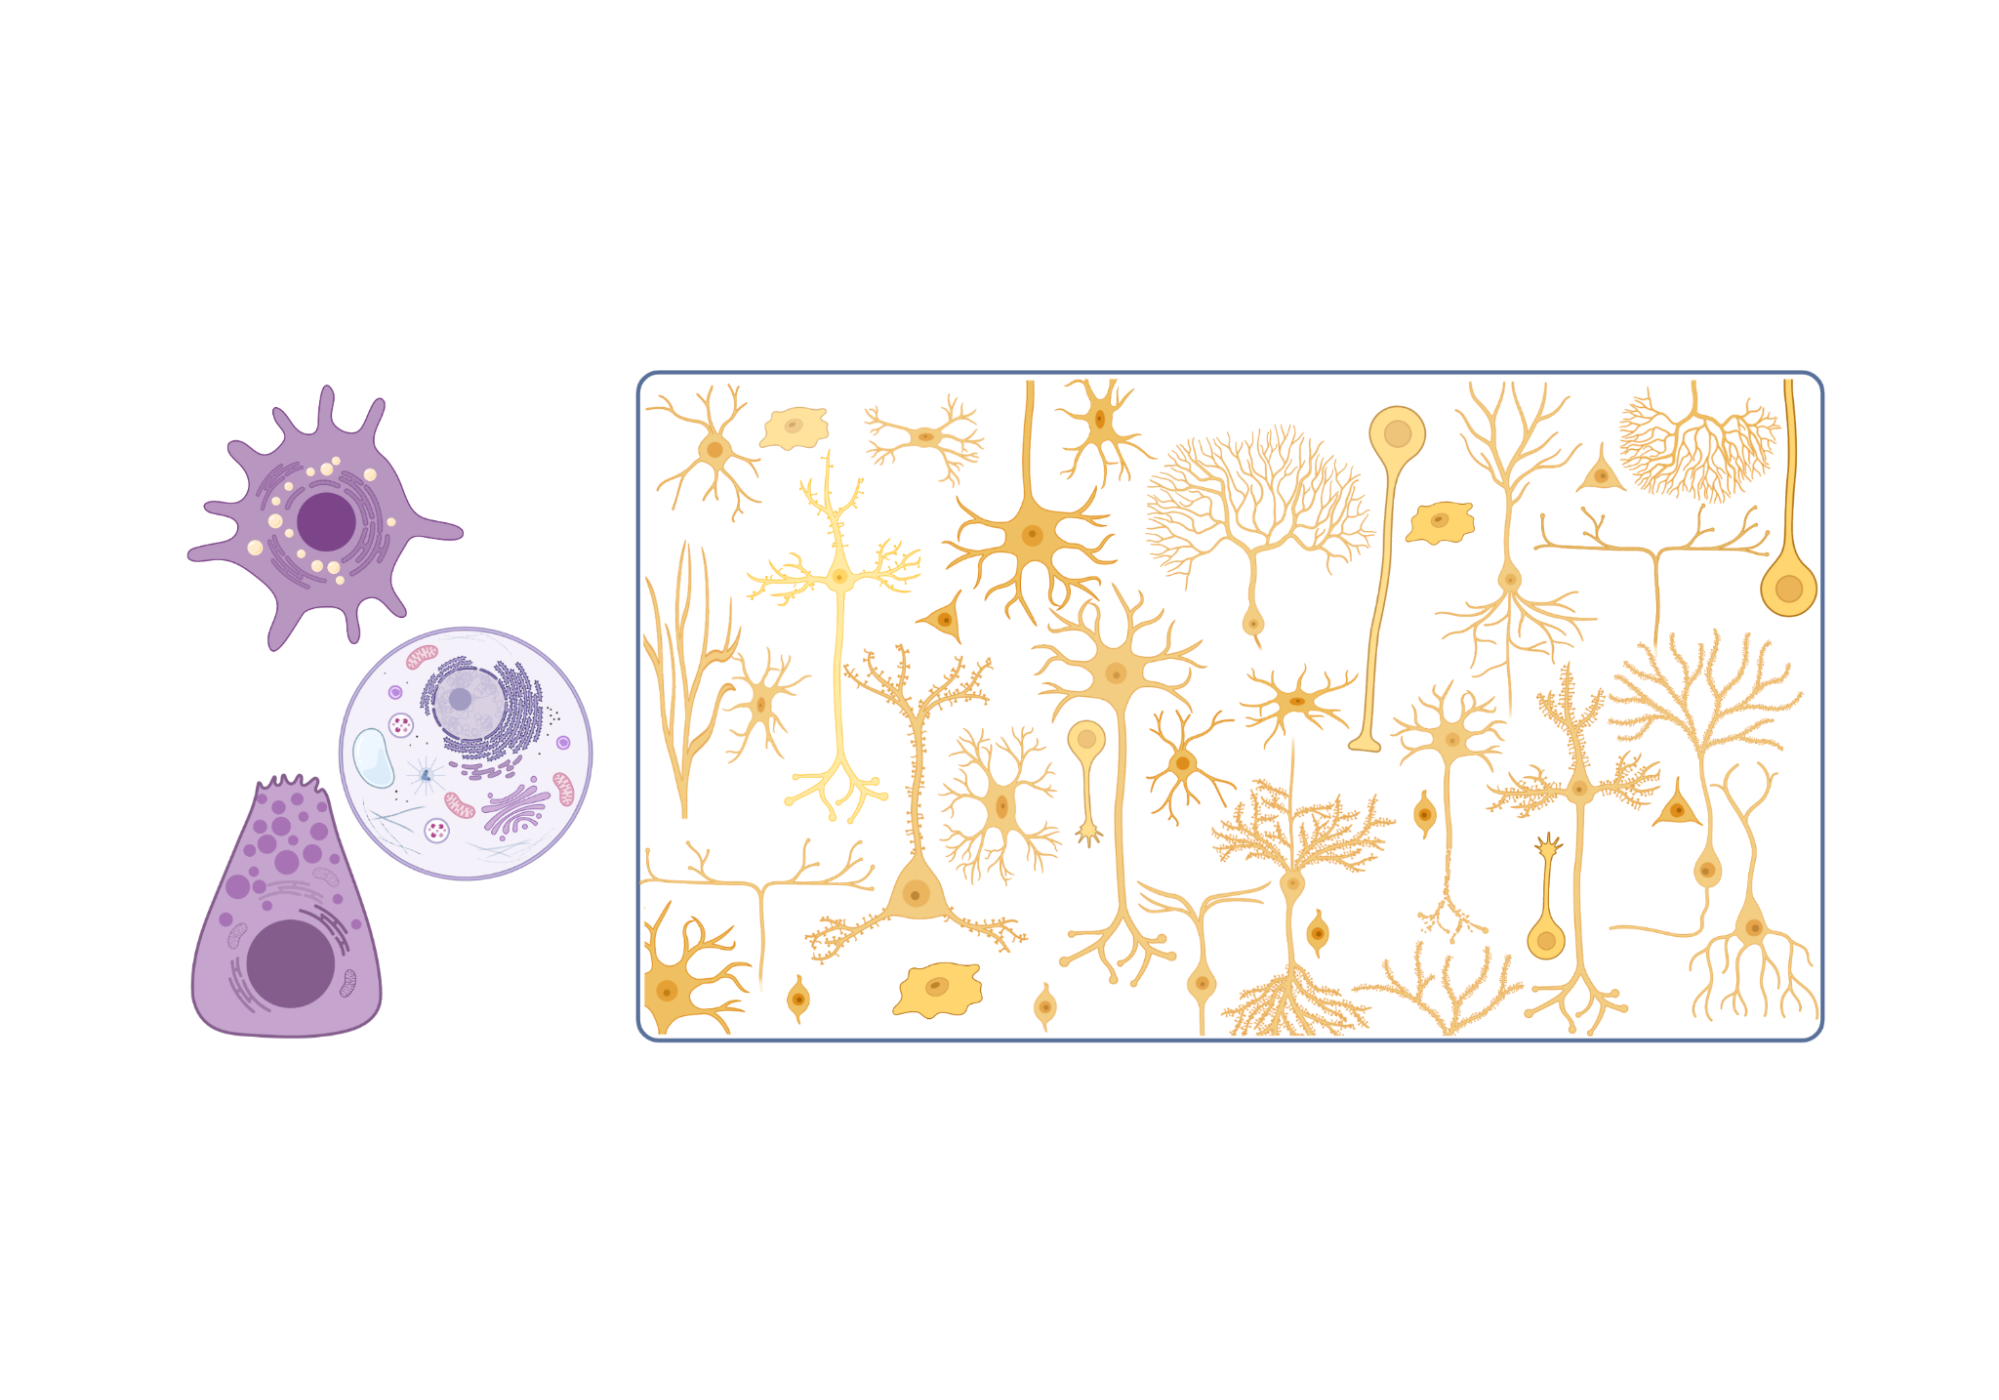 On the left, three different cells of the body are illustrated in purple (including an immune cell and a pancreatic cell), all having a general circular or blob-like shape. On the right, there is a snapshot of many different shapes and sizes of neurons illustrated in yellow, with long spindly extensions in some cases, appearing star-shaped, or appearing blob-like in other cases.